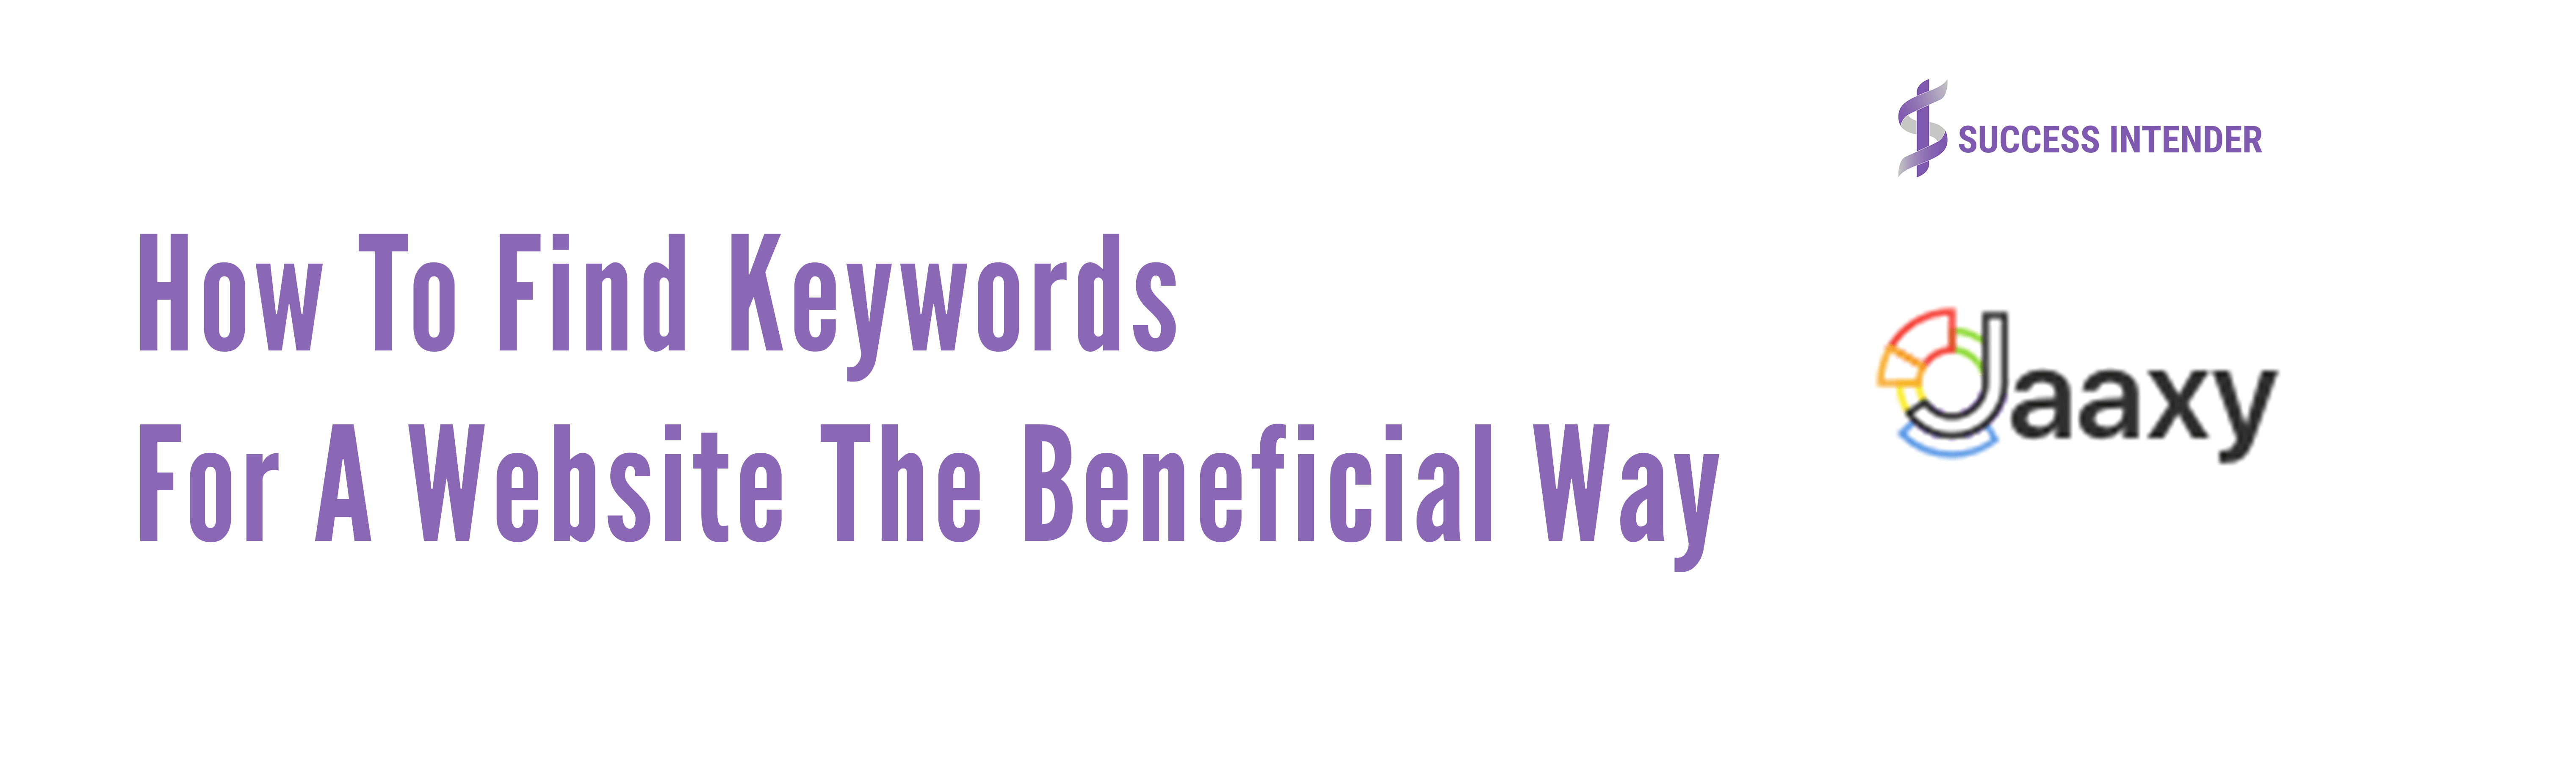 How To Find Keywords For A Website The Beneficial Way